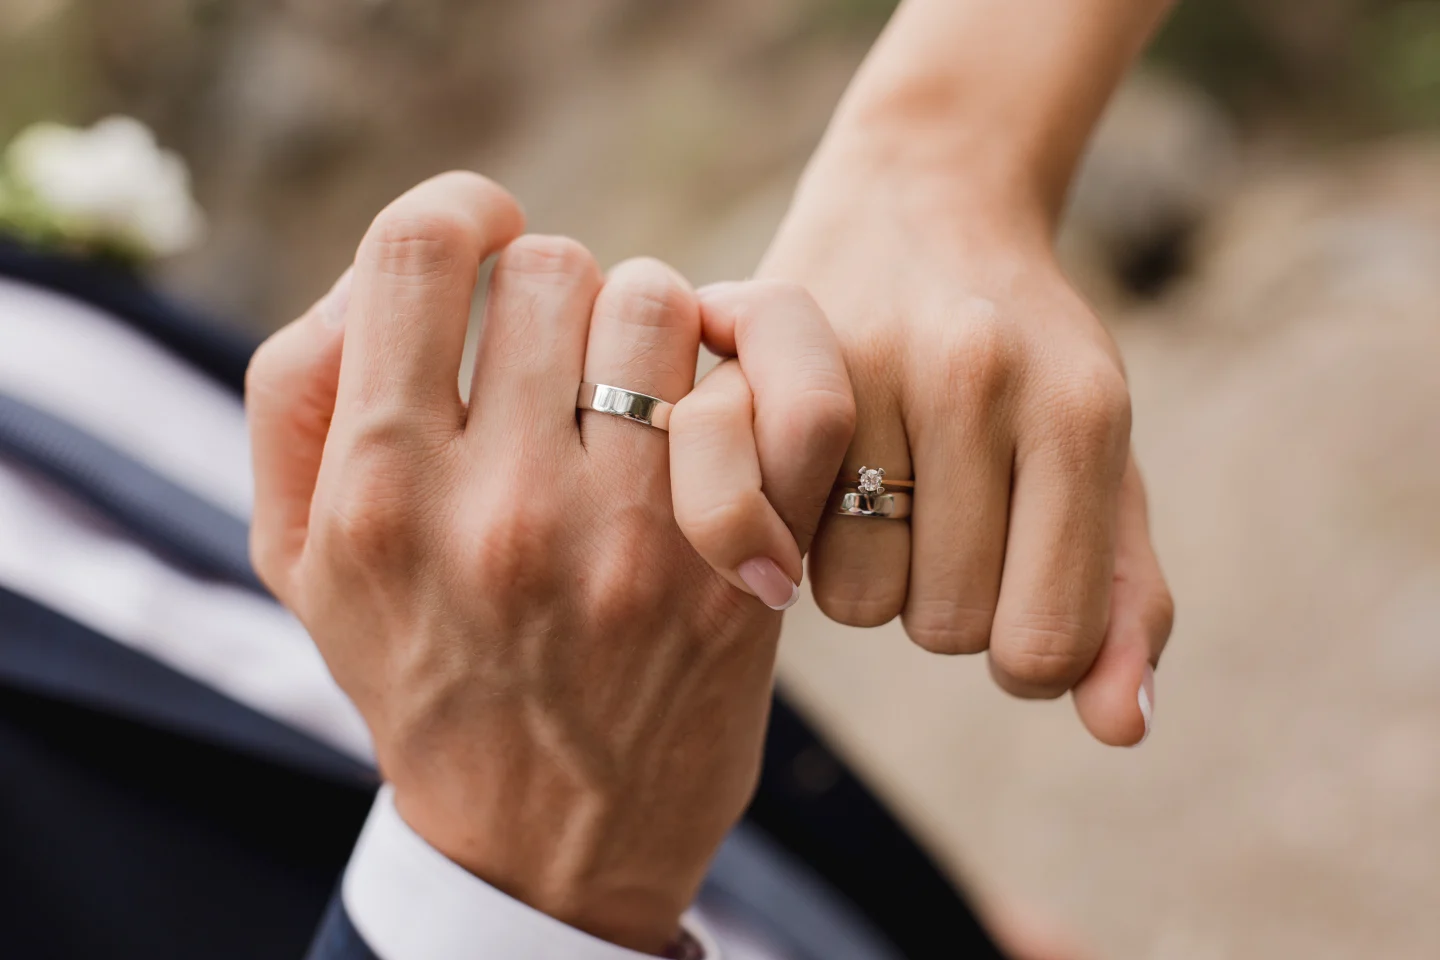 senior-married-couple-holding-hands-closeup-sixty-years-of-fidelity-picture-id157394468